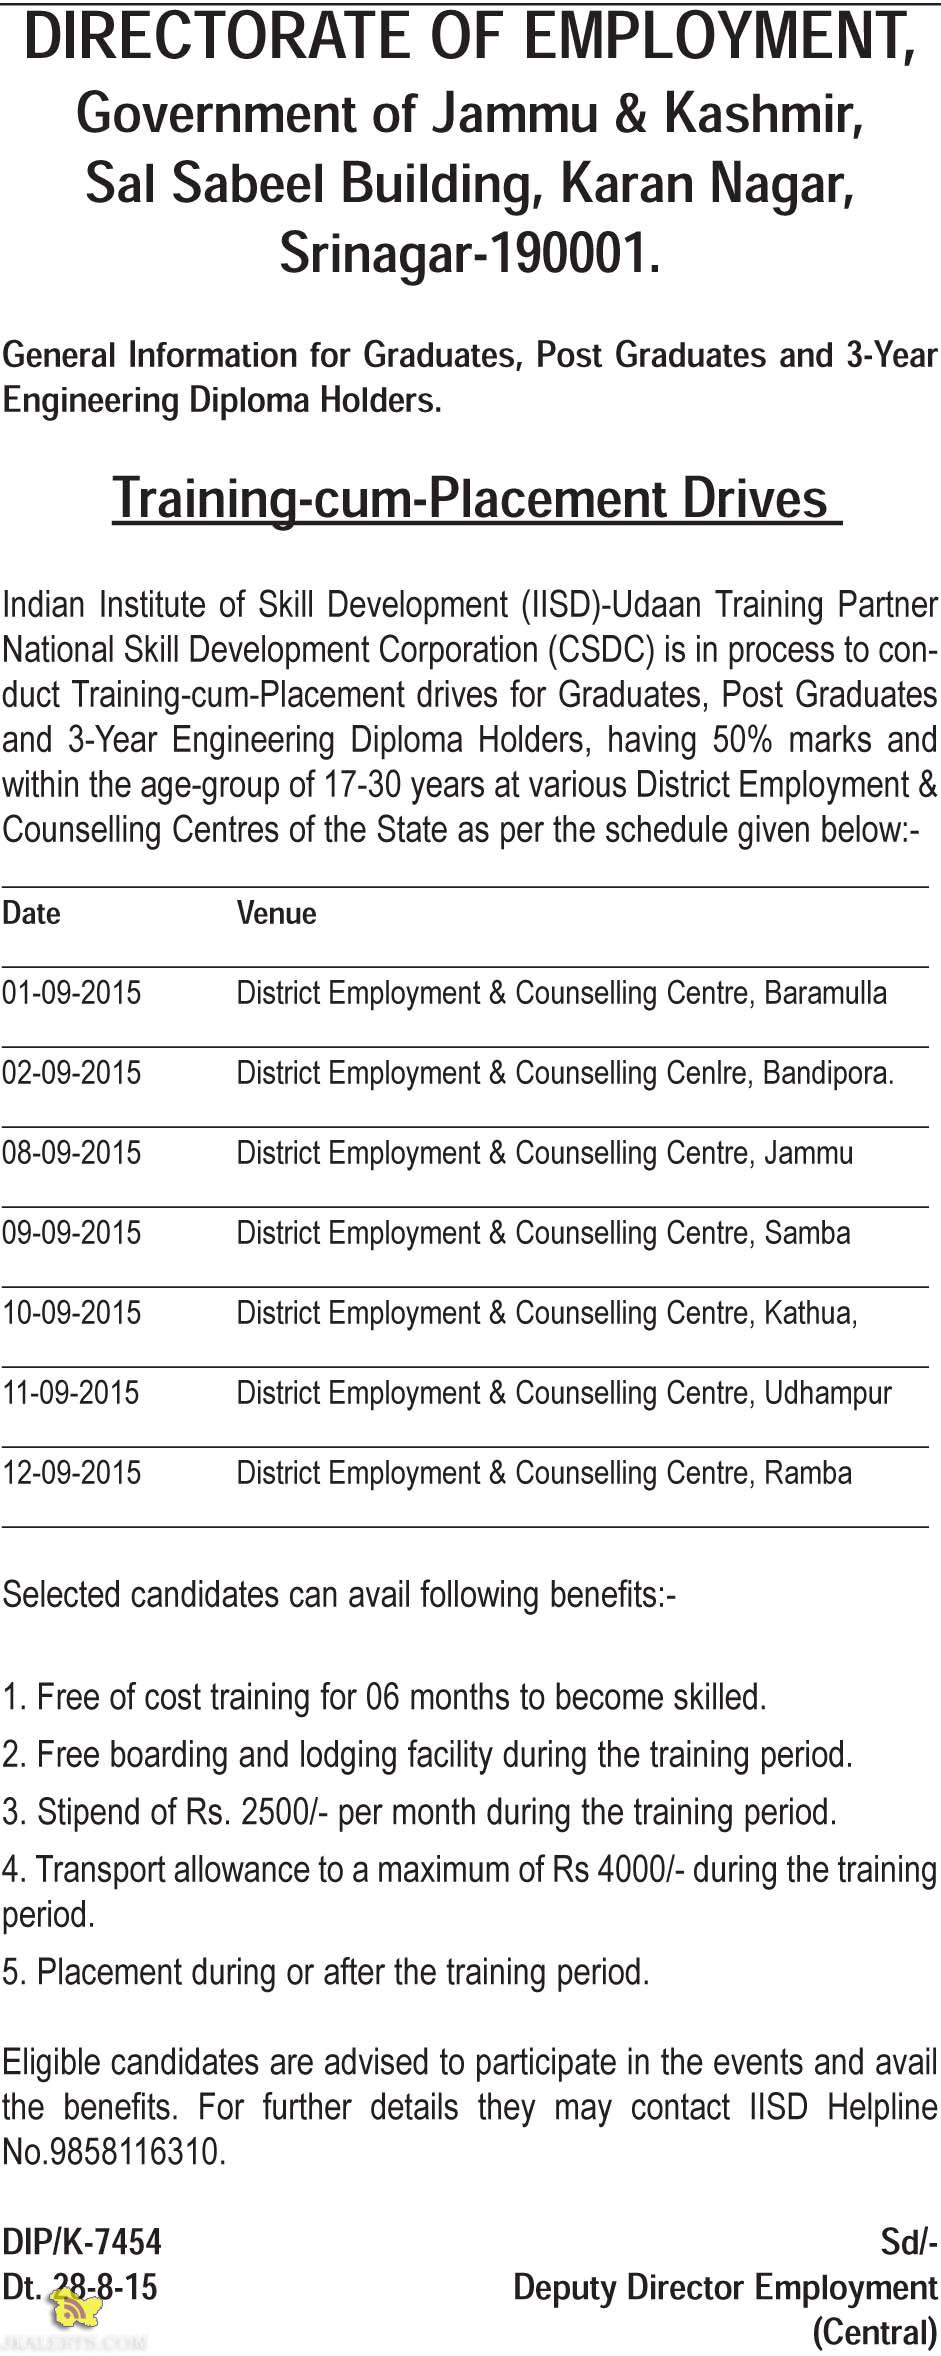 Training cum Placement Drive for Graduates, Post Graduates and 3-Year Engineering Diploma holder